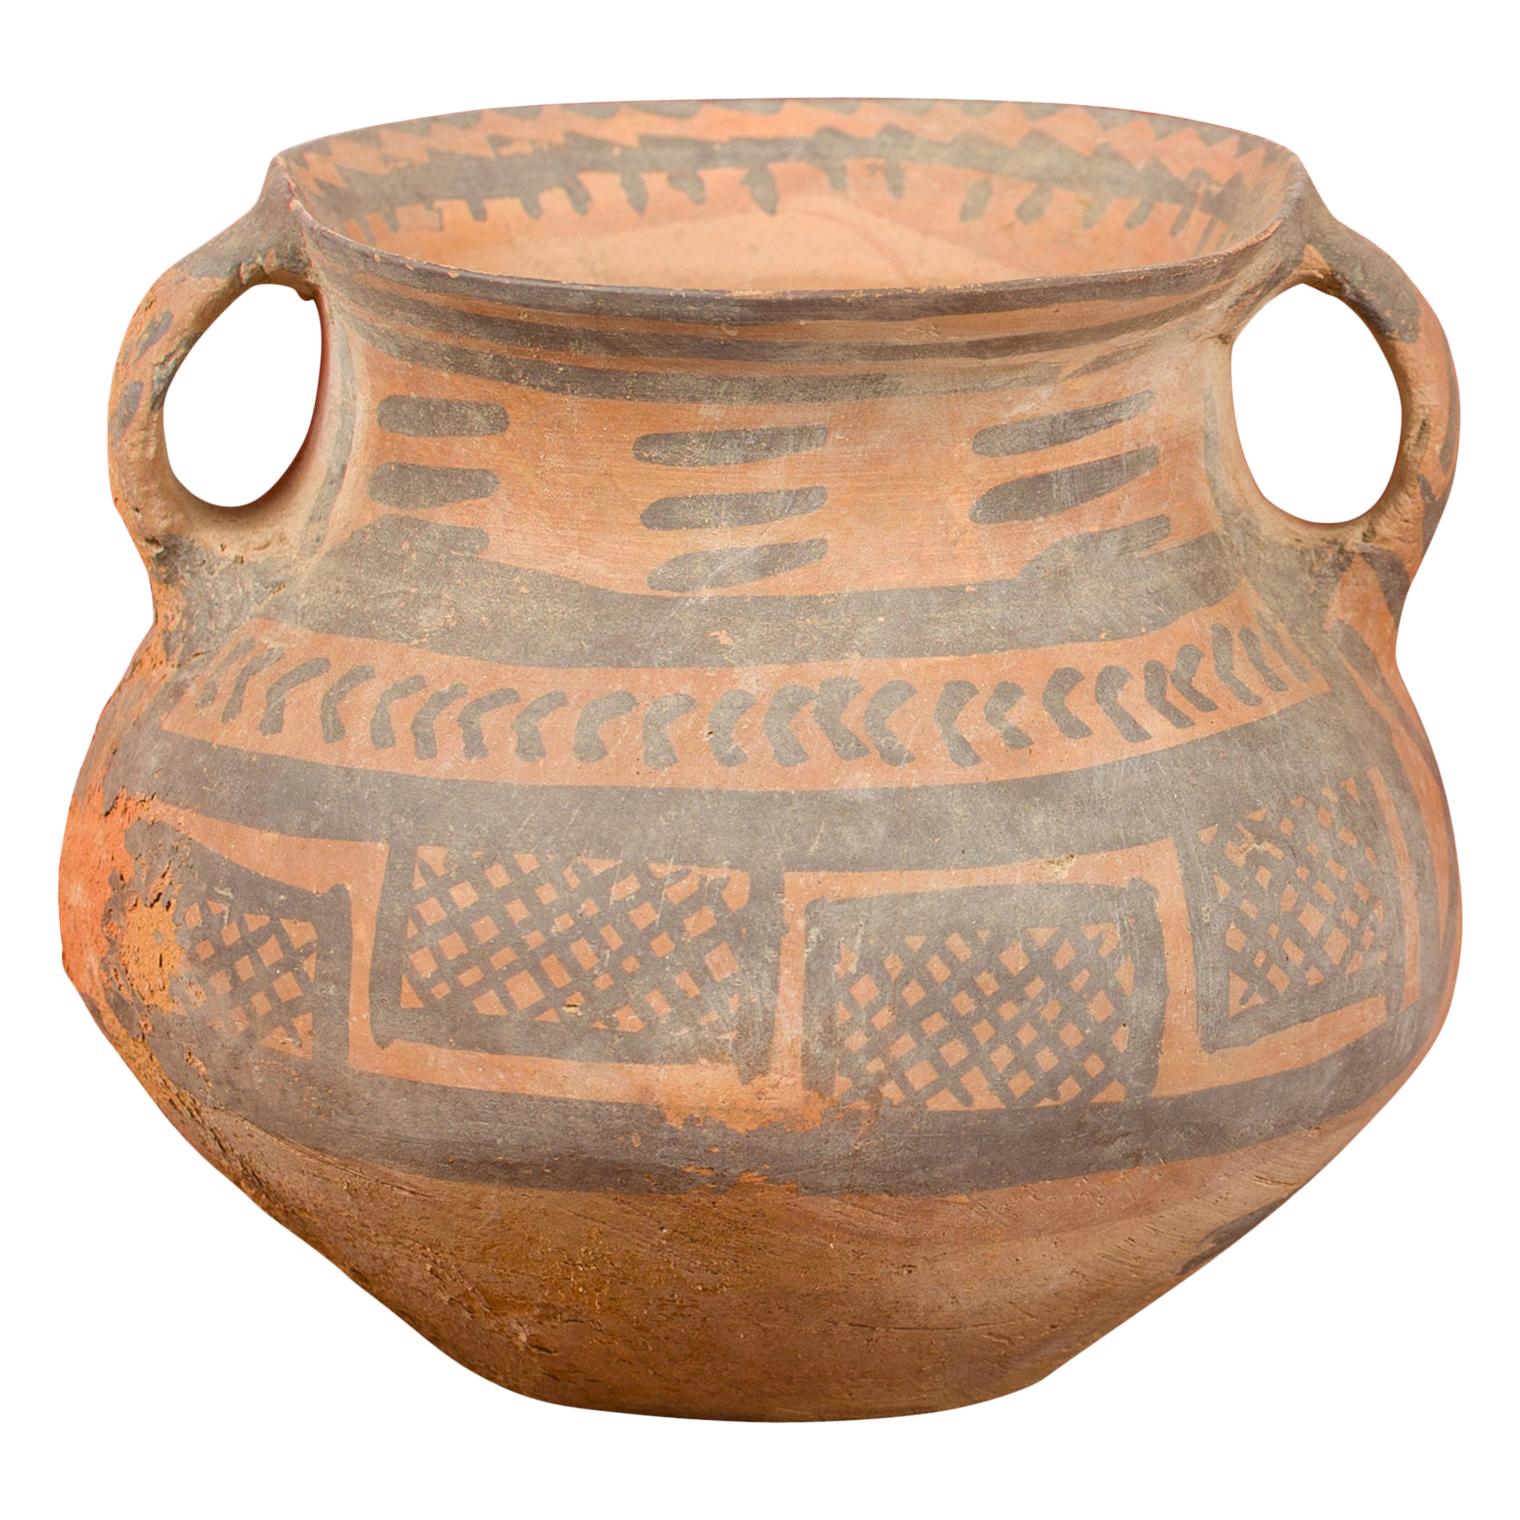 Petite Neolithic Terracotta Pot with Brown Geometric Decor and Lateral Handles